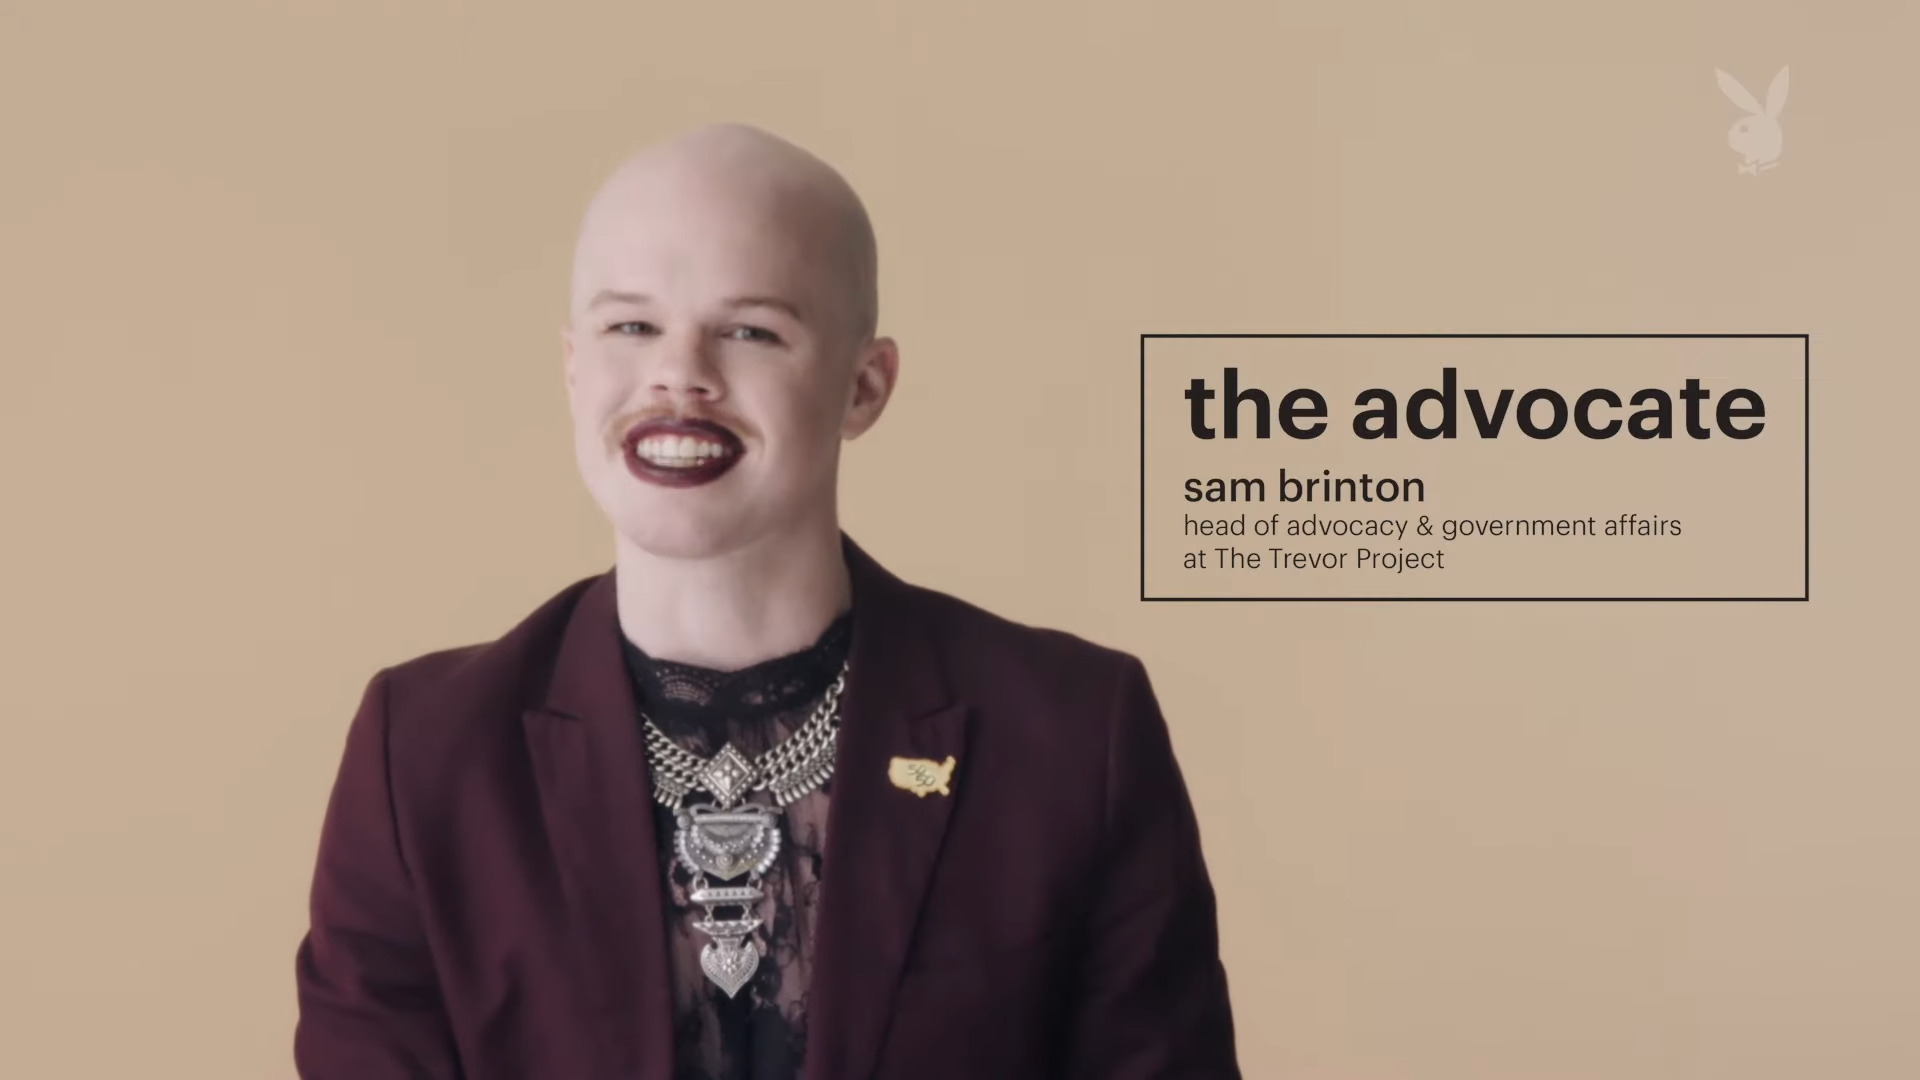 Sam Brinton speaks with Playboy for their "Faces of Resilience" profile series